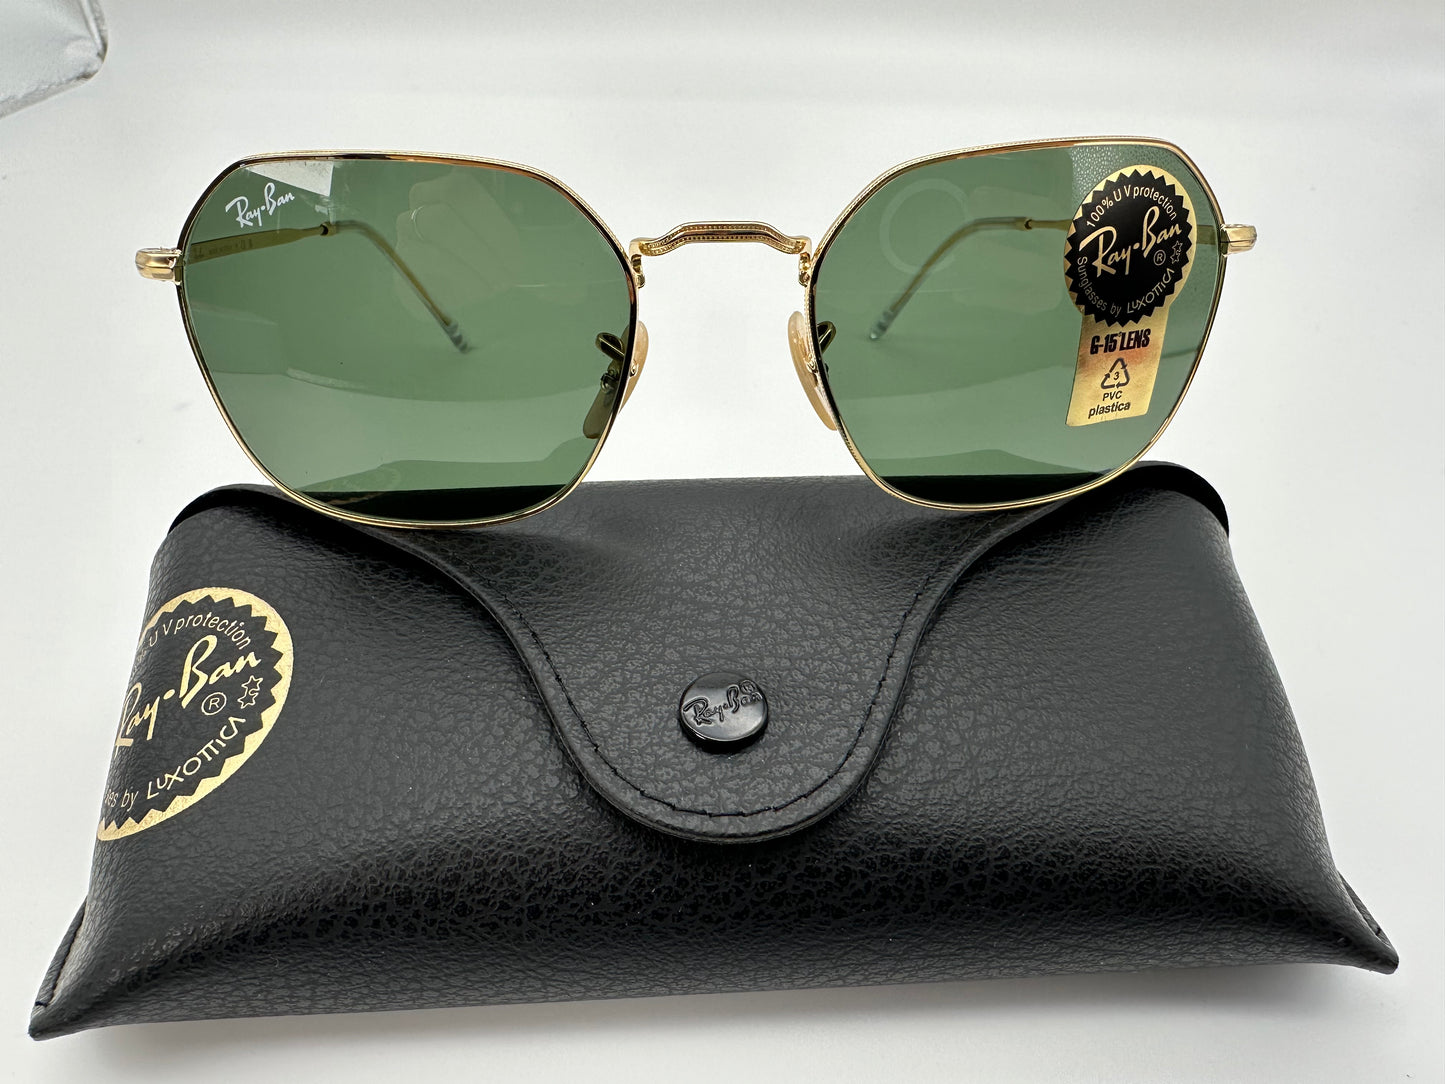 Ray-Ban Jim RB3694 001/31 53mm Italy